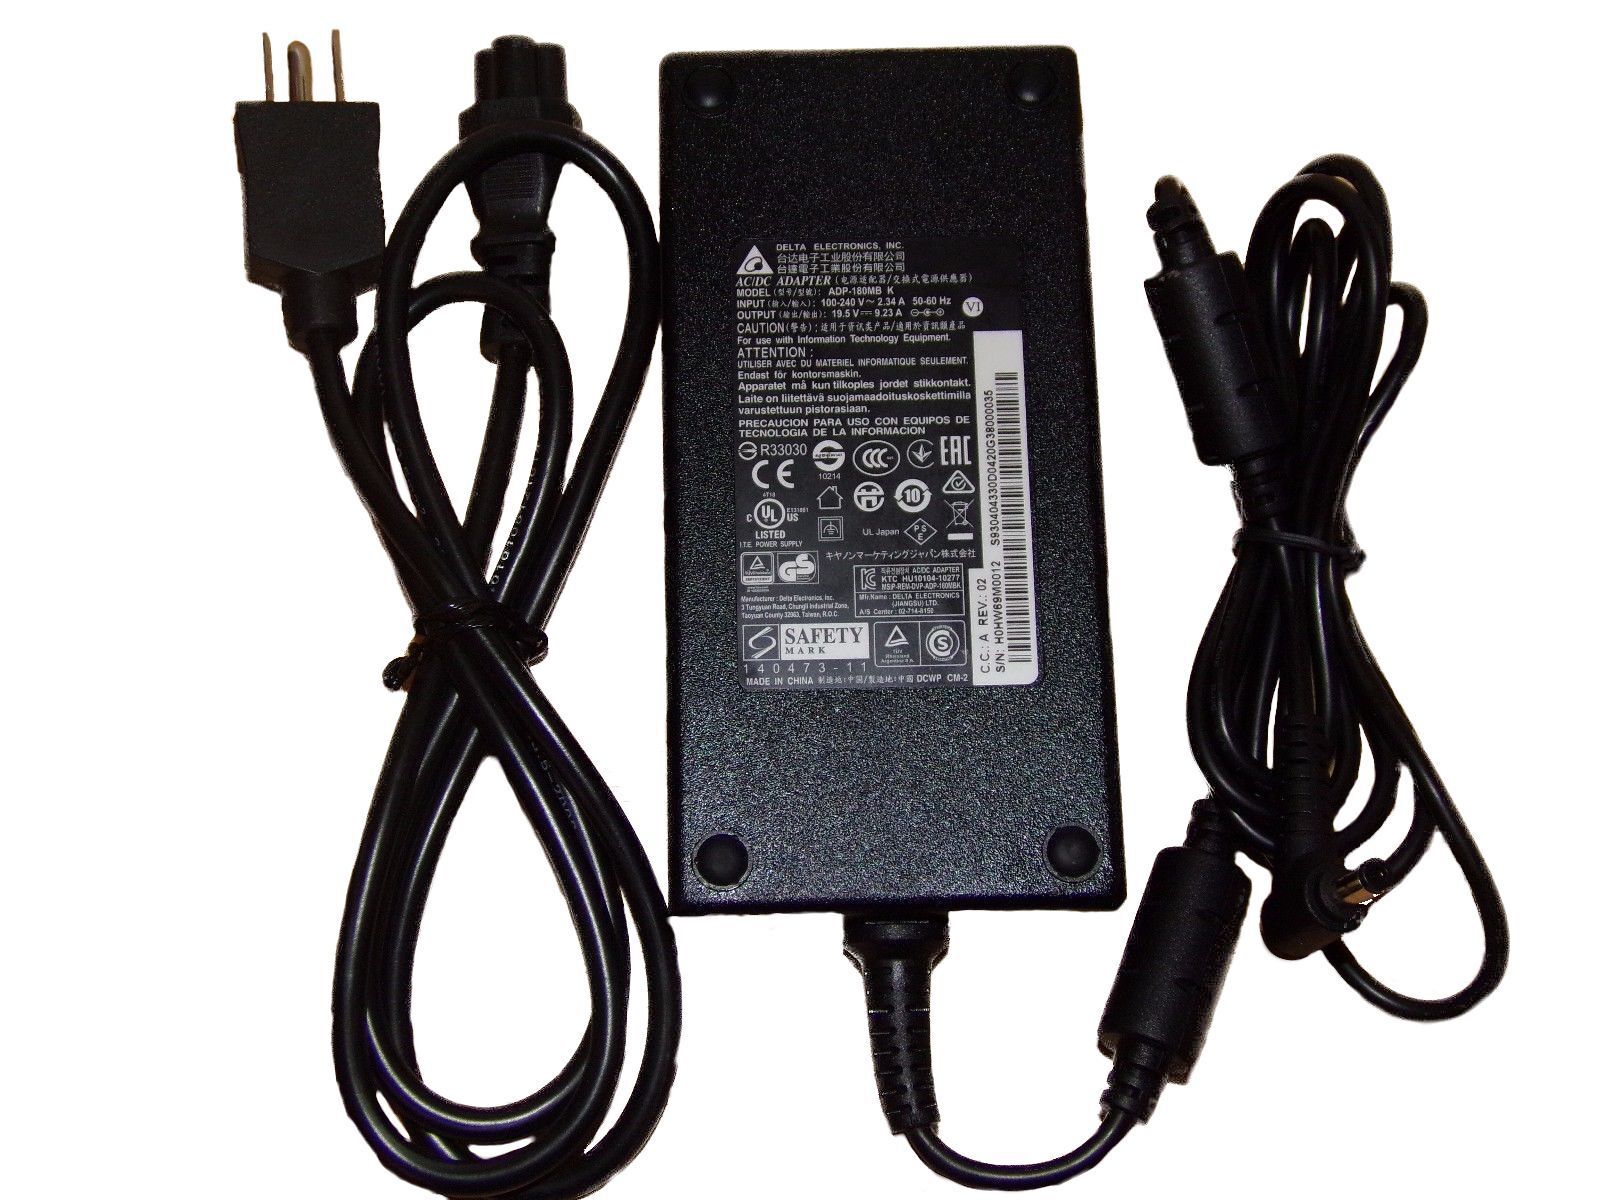 DELTA Electronics MSI GS63VR ADP-180MB K 5.5mmx2 5mm 19.5V 9.23A 180W Ac Adapter